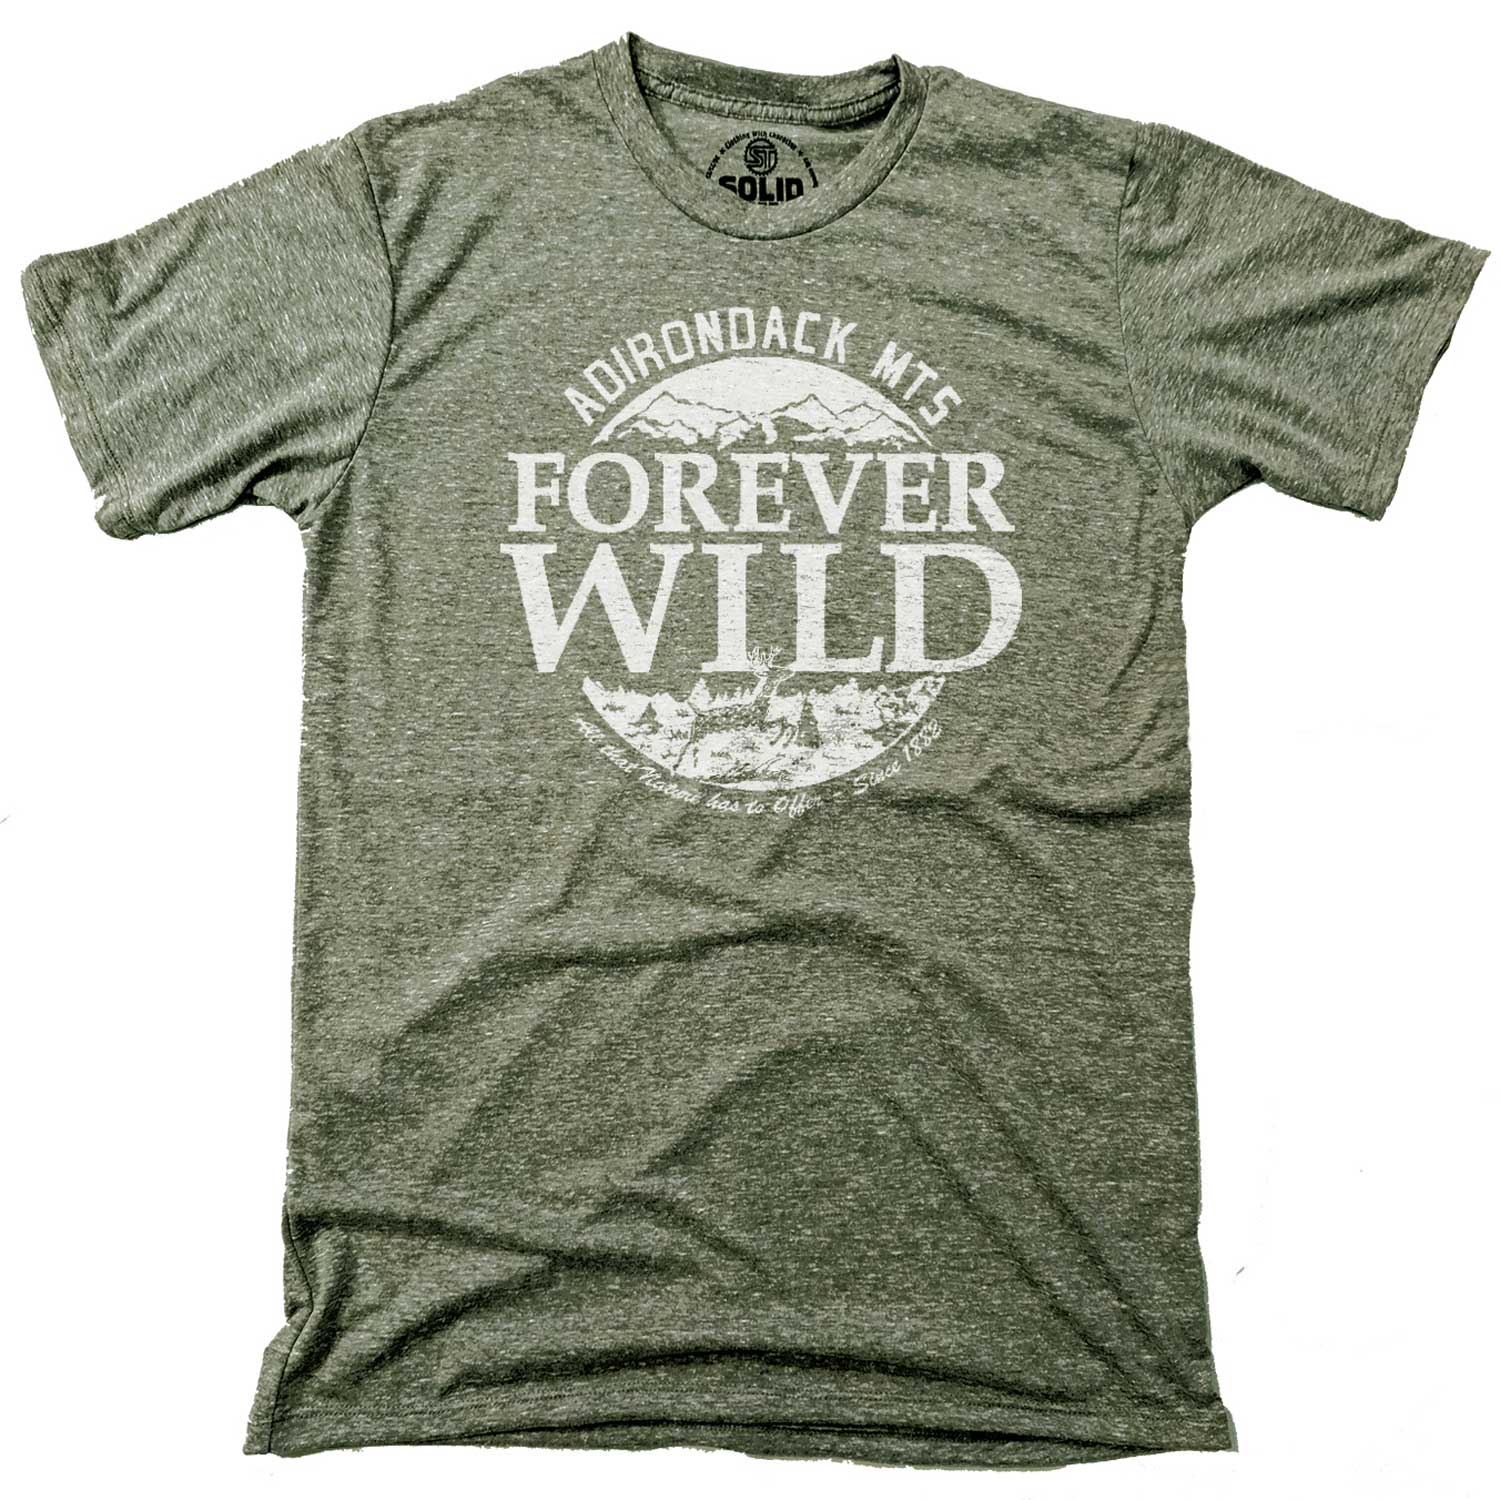 Men's Forever Wild Cool Graphic T-Shirt | Vintage Adirondack Mountains Tee | Solid Threads